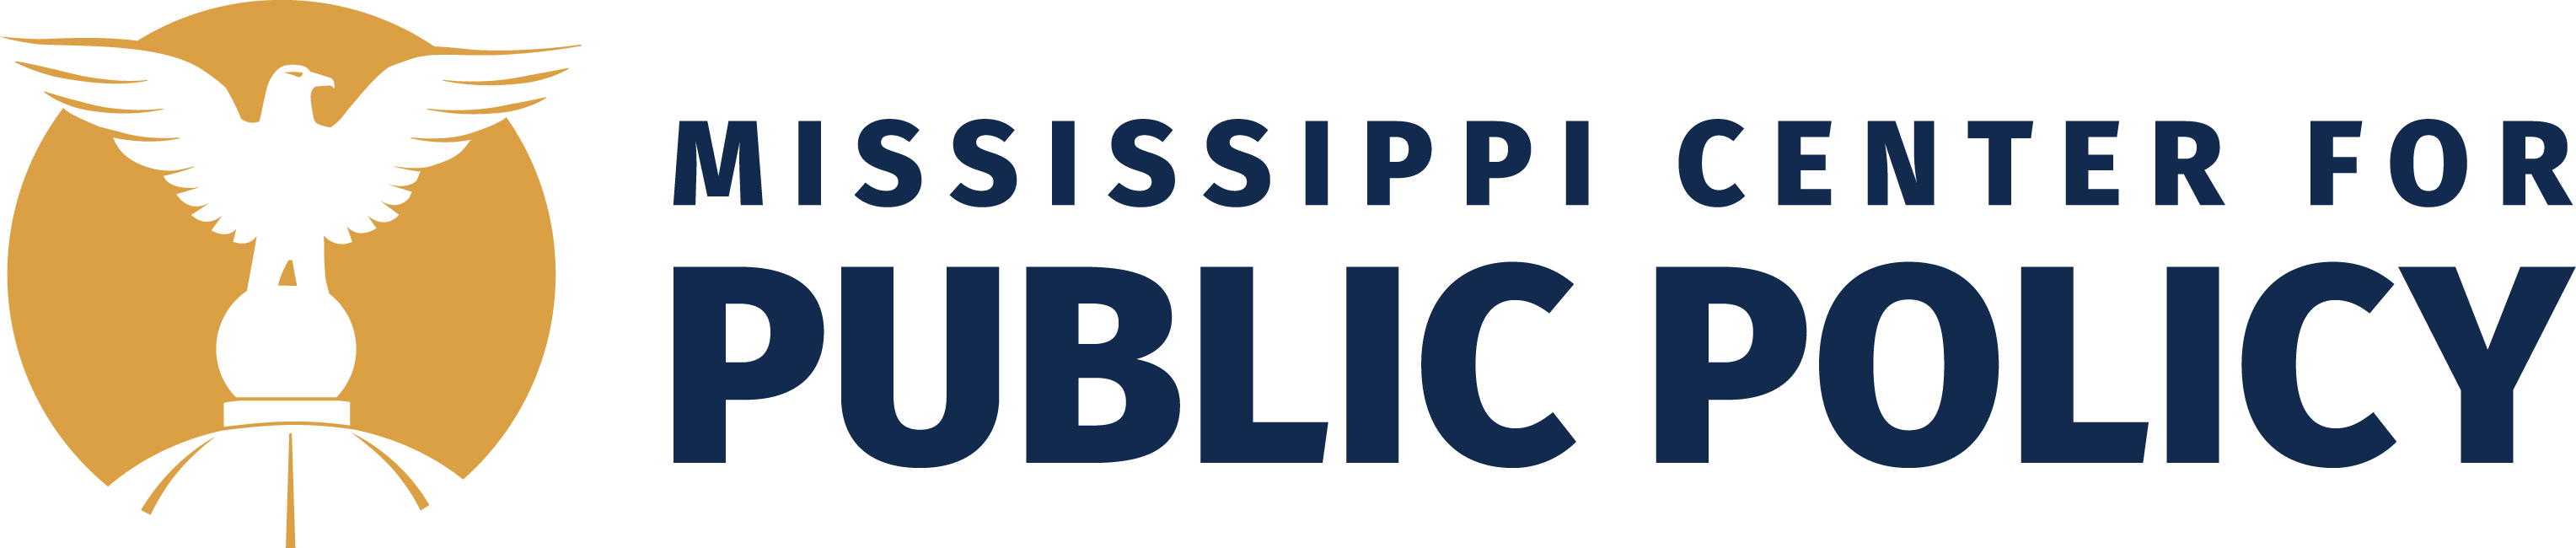 Mississippi Center for Public Policy logo